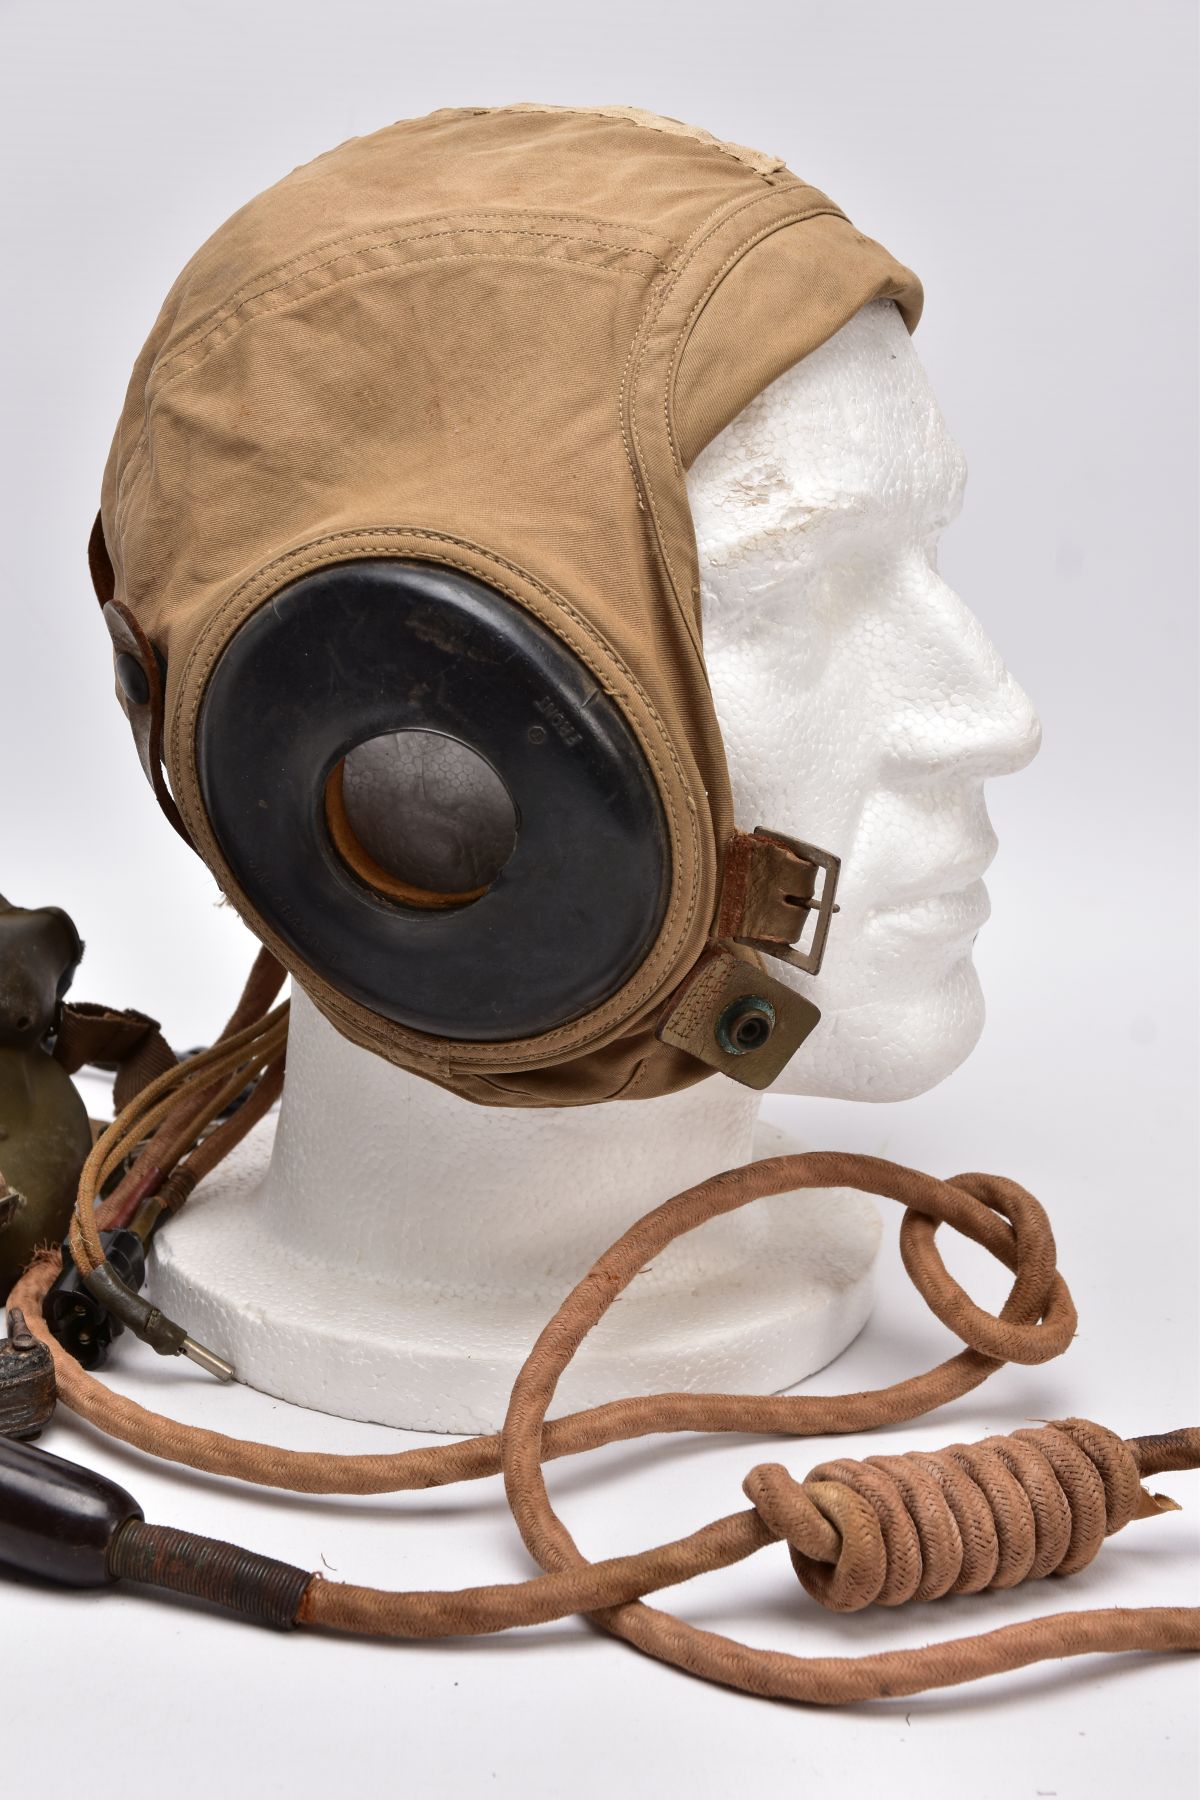 A WWII ERA USA FLYING HELMET IN BEIGE CANVAS WITH ATTACHED RADIO COMMUNICATION LEAD, the cap is by - Image 10 of 13